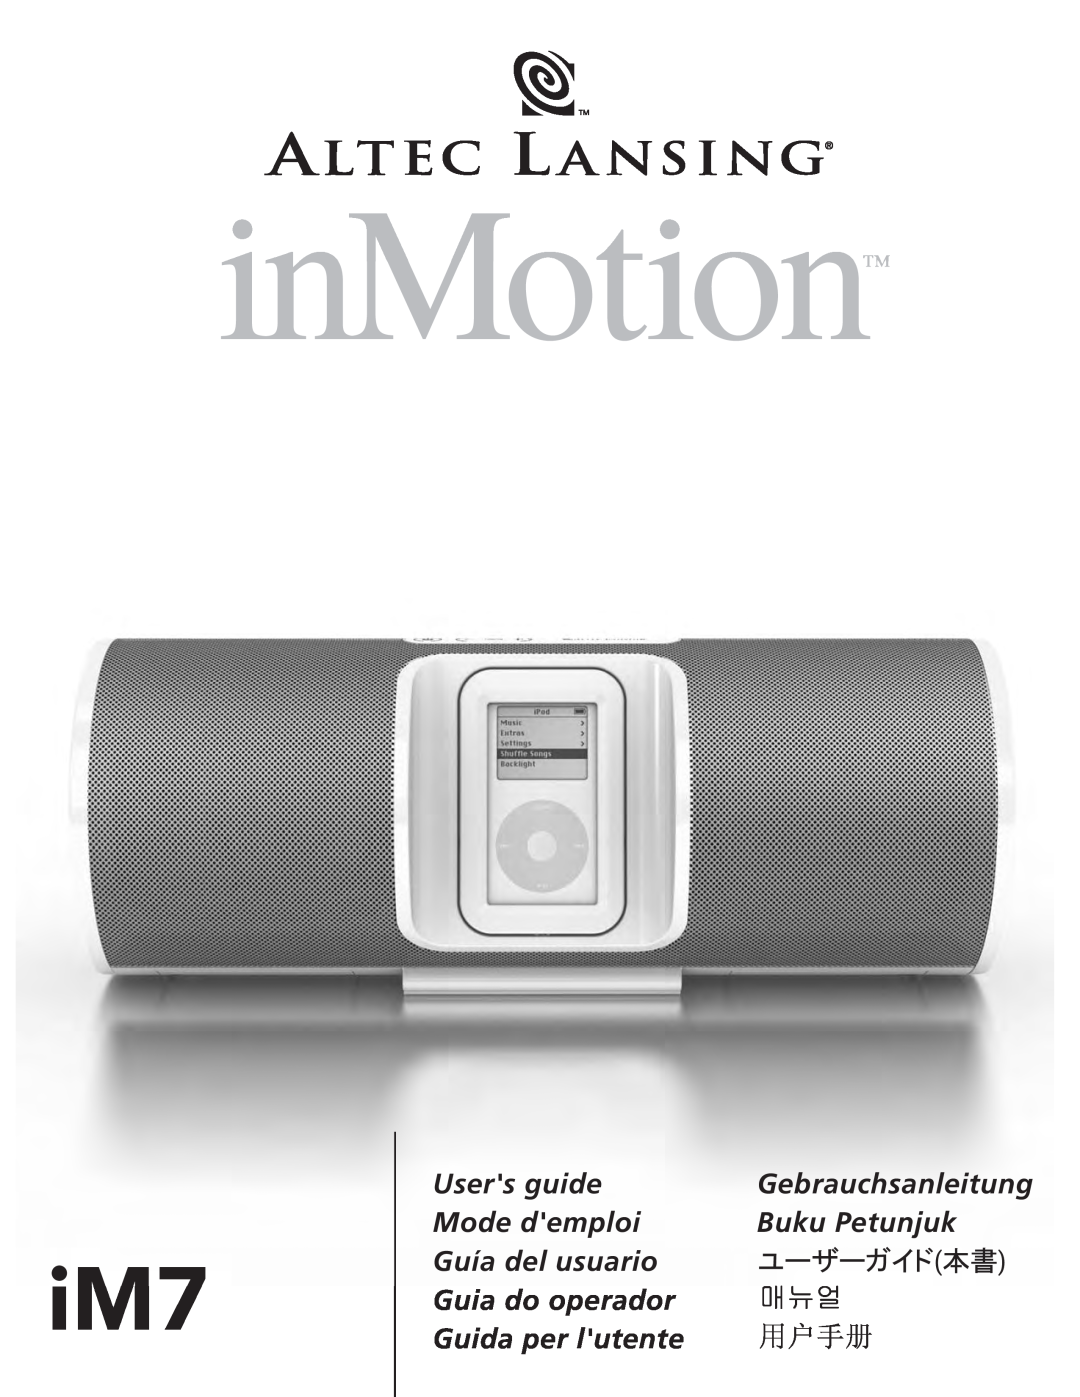 Altec Lansing IM7 manual u n . p l u g g e d, Big portable sound for the iPod, nHigh Efficiency Digital Amplification 